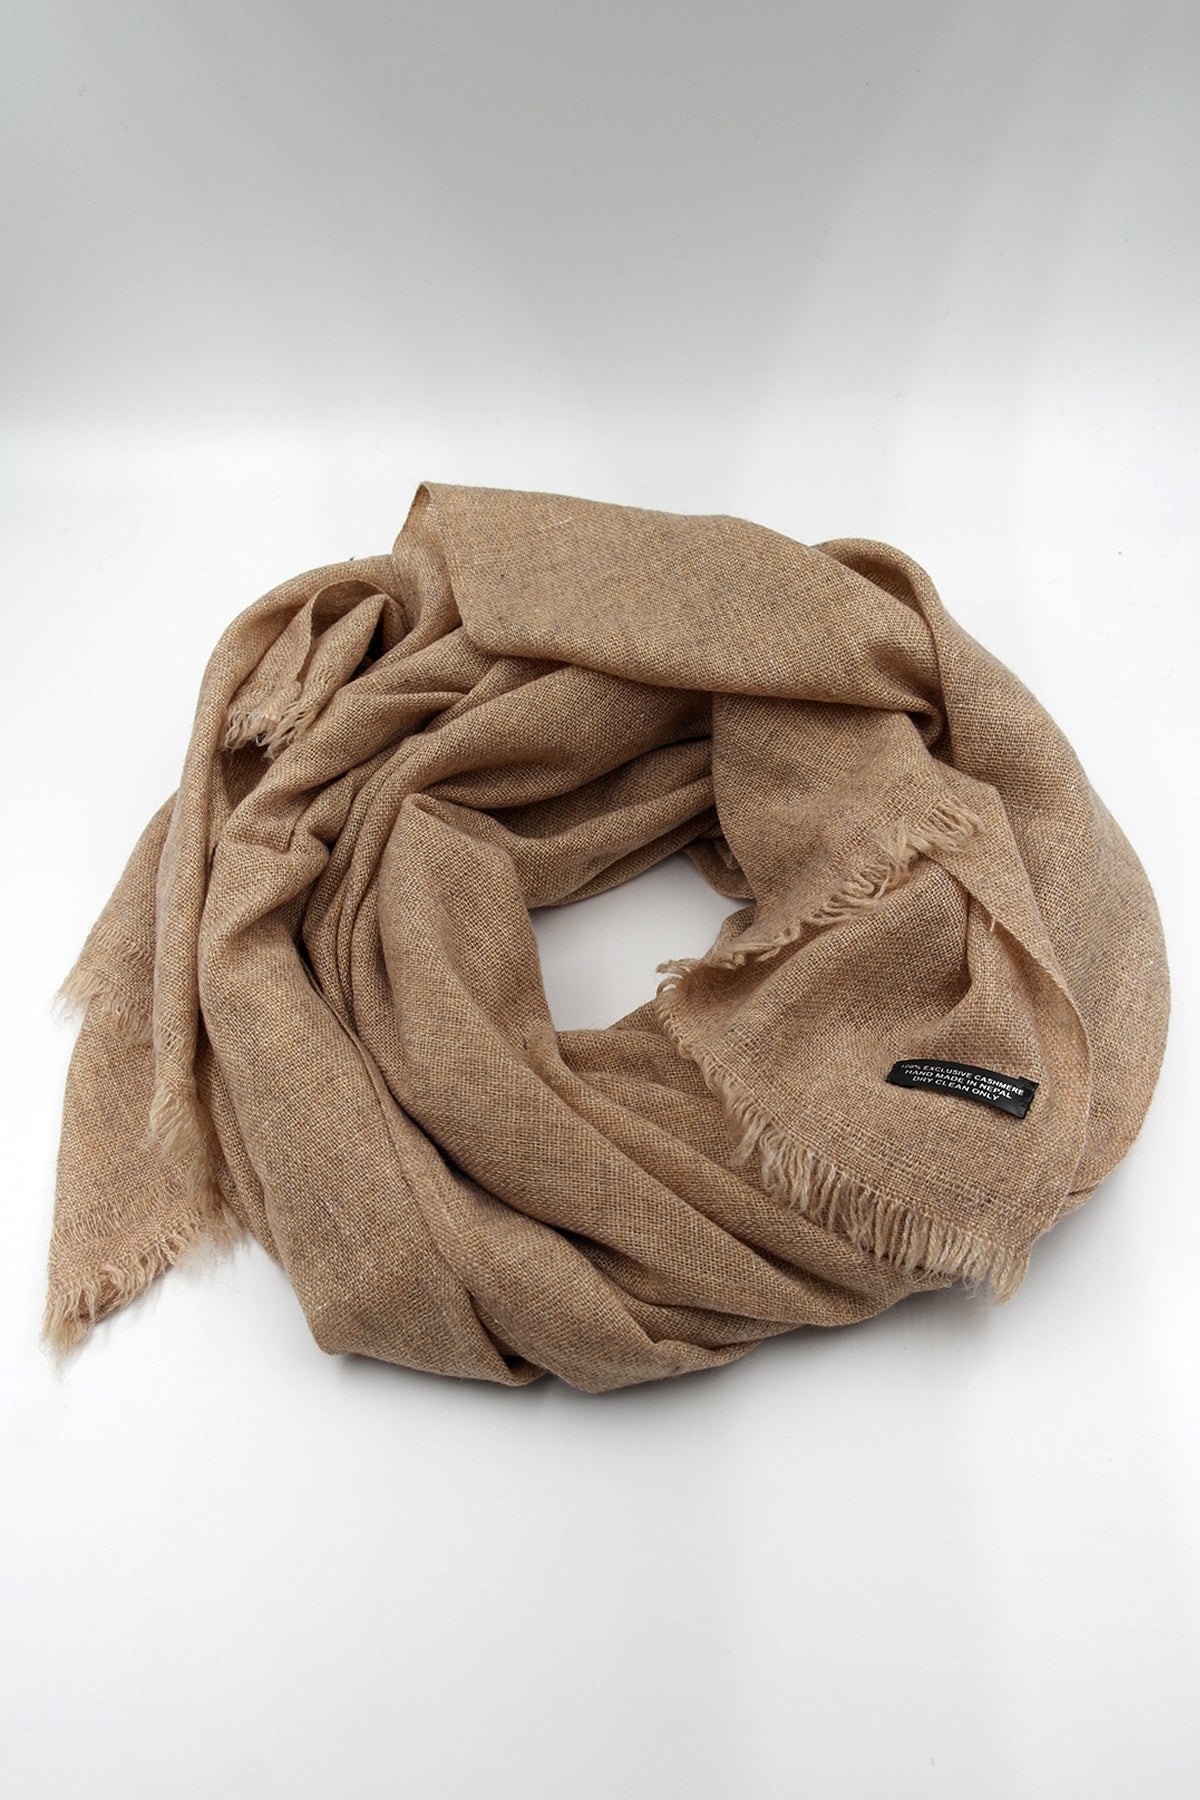 Light Brown Cashmere pashmina scarf for Women handloomed Shawl